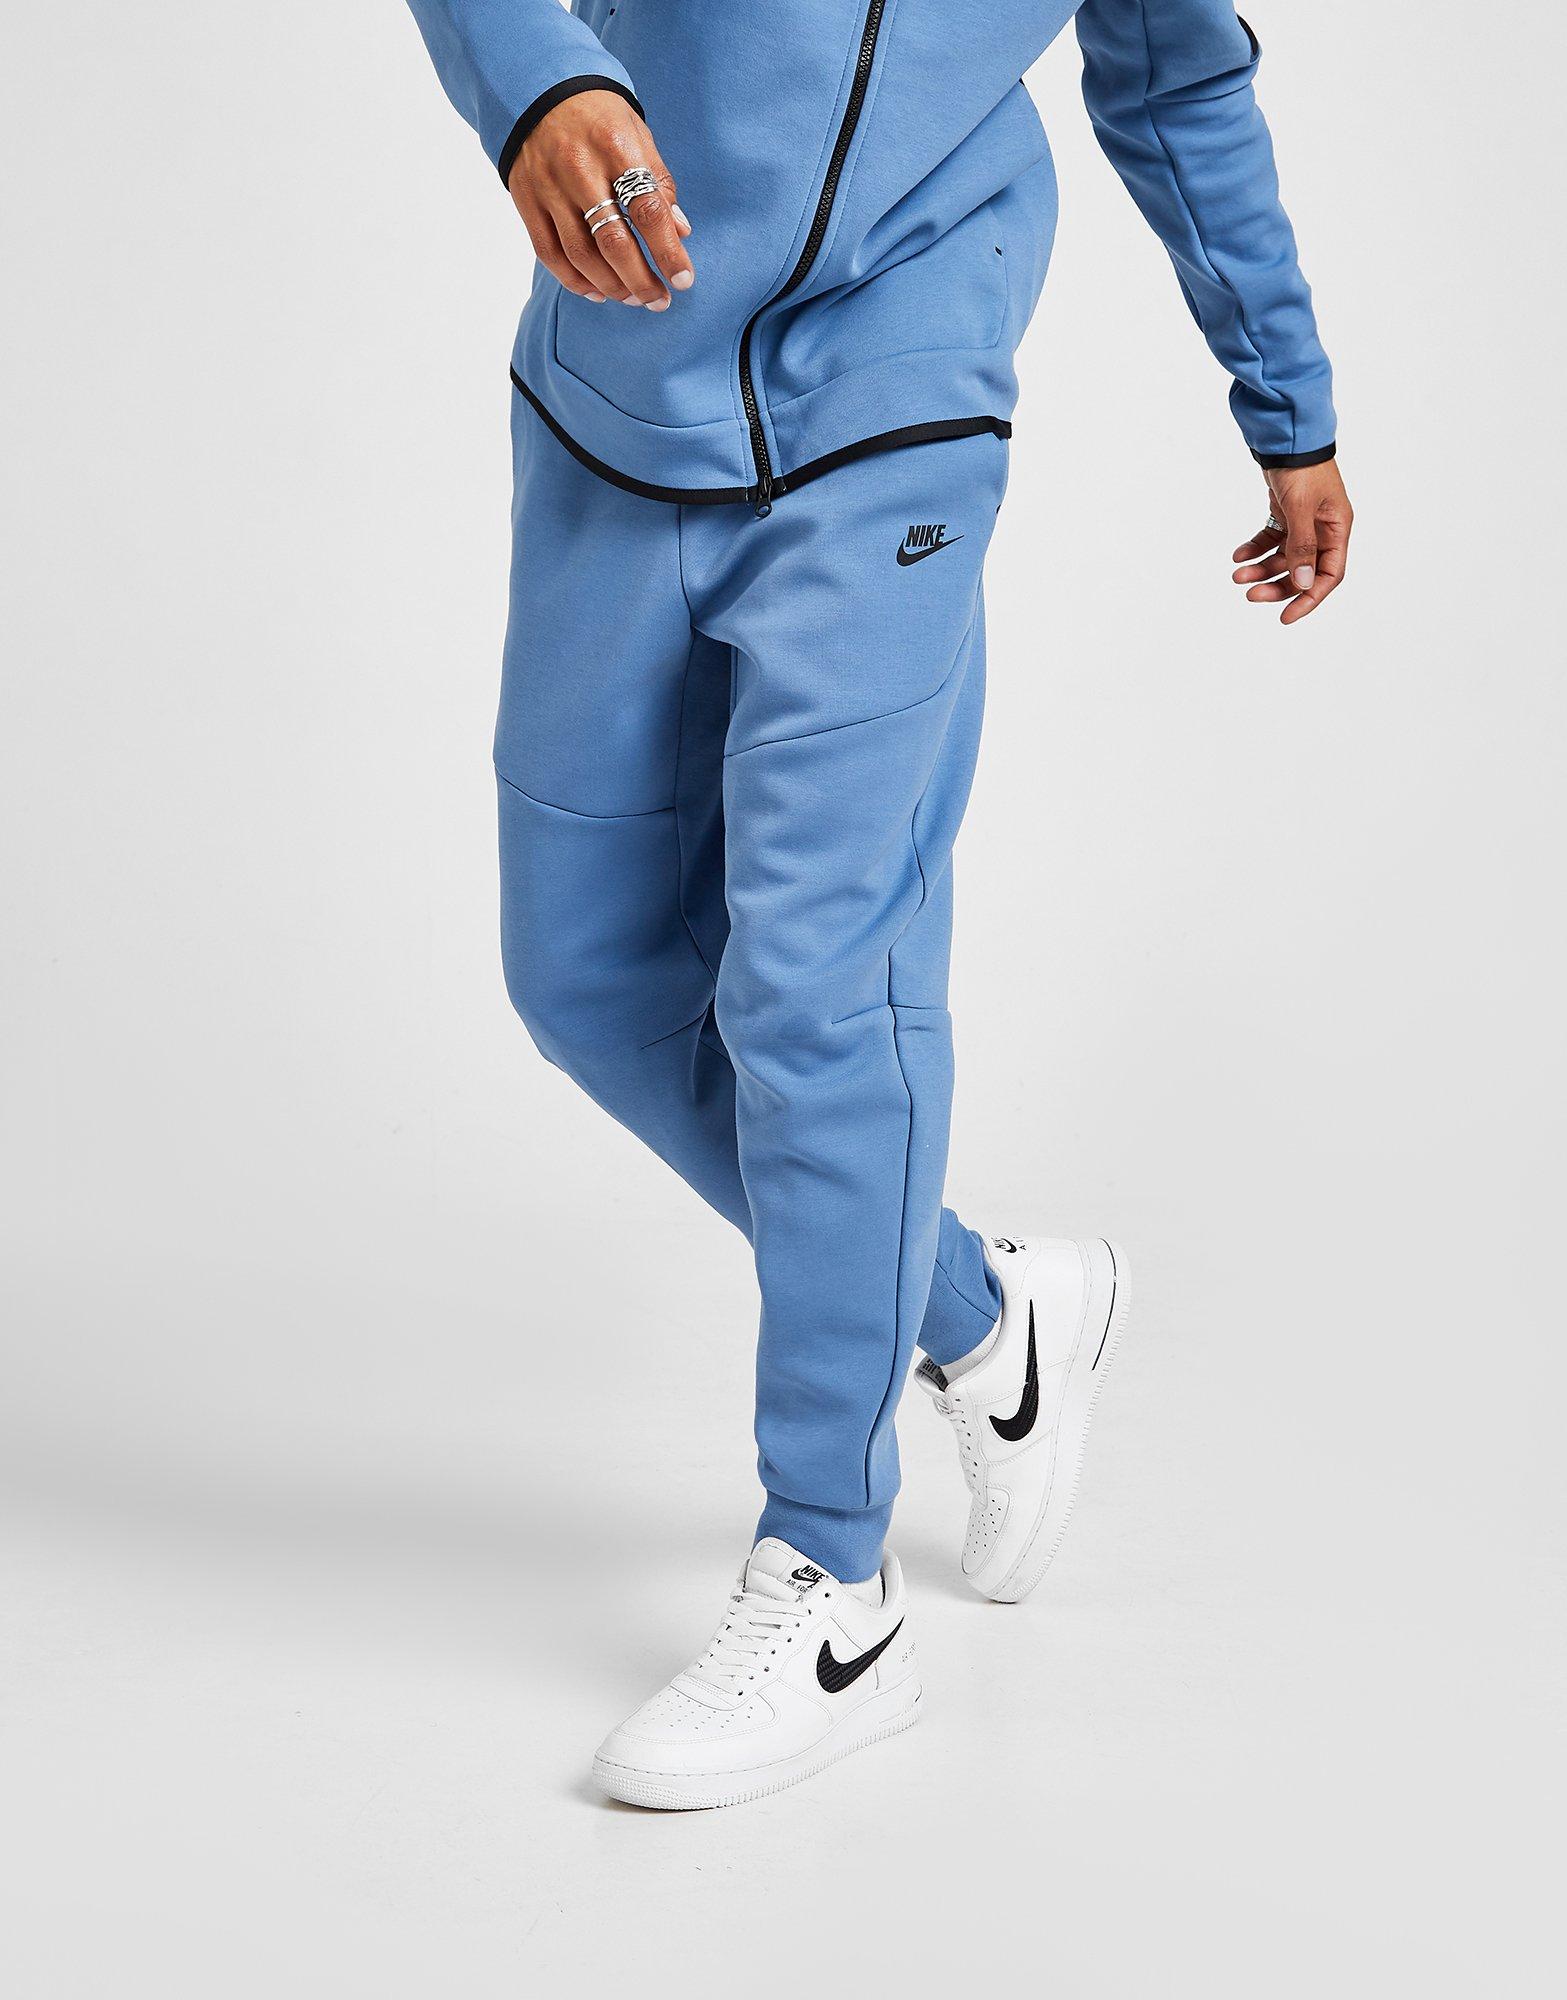 blue and black nike tech tracksuit